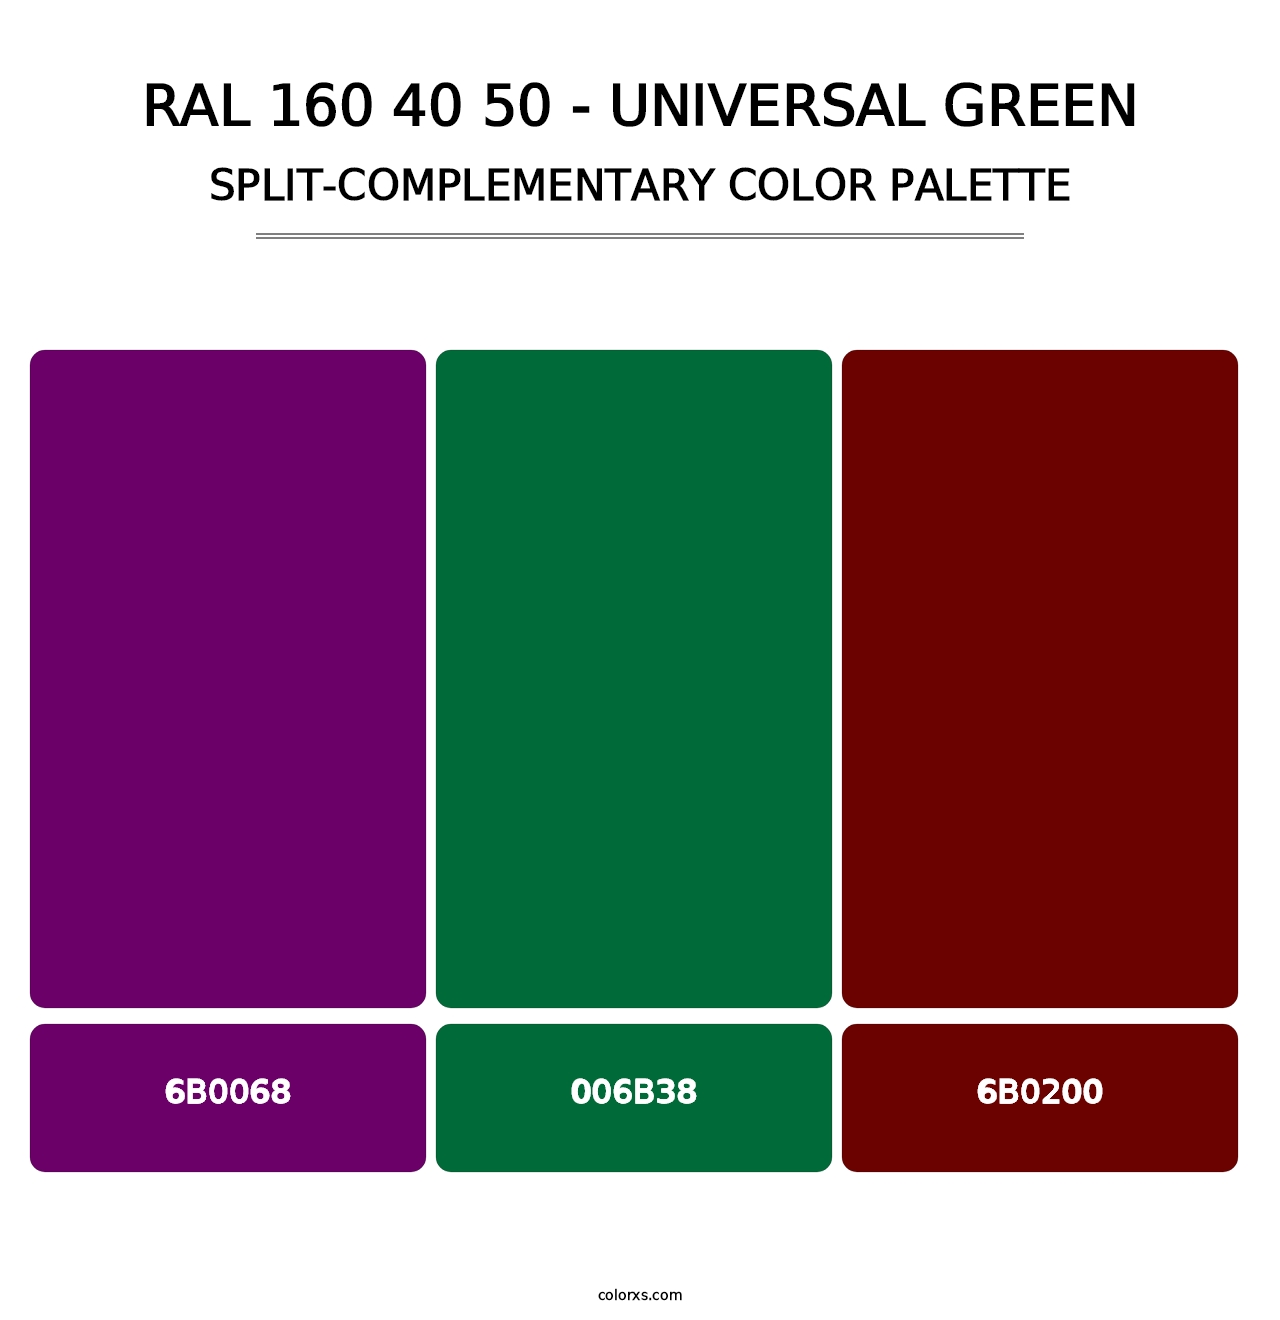 RAL 160 40 50 - Universal Green - Split-Complementary Color Palette